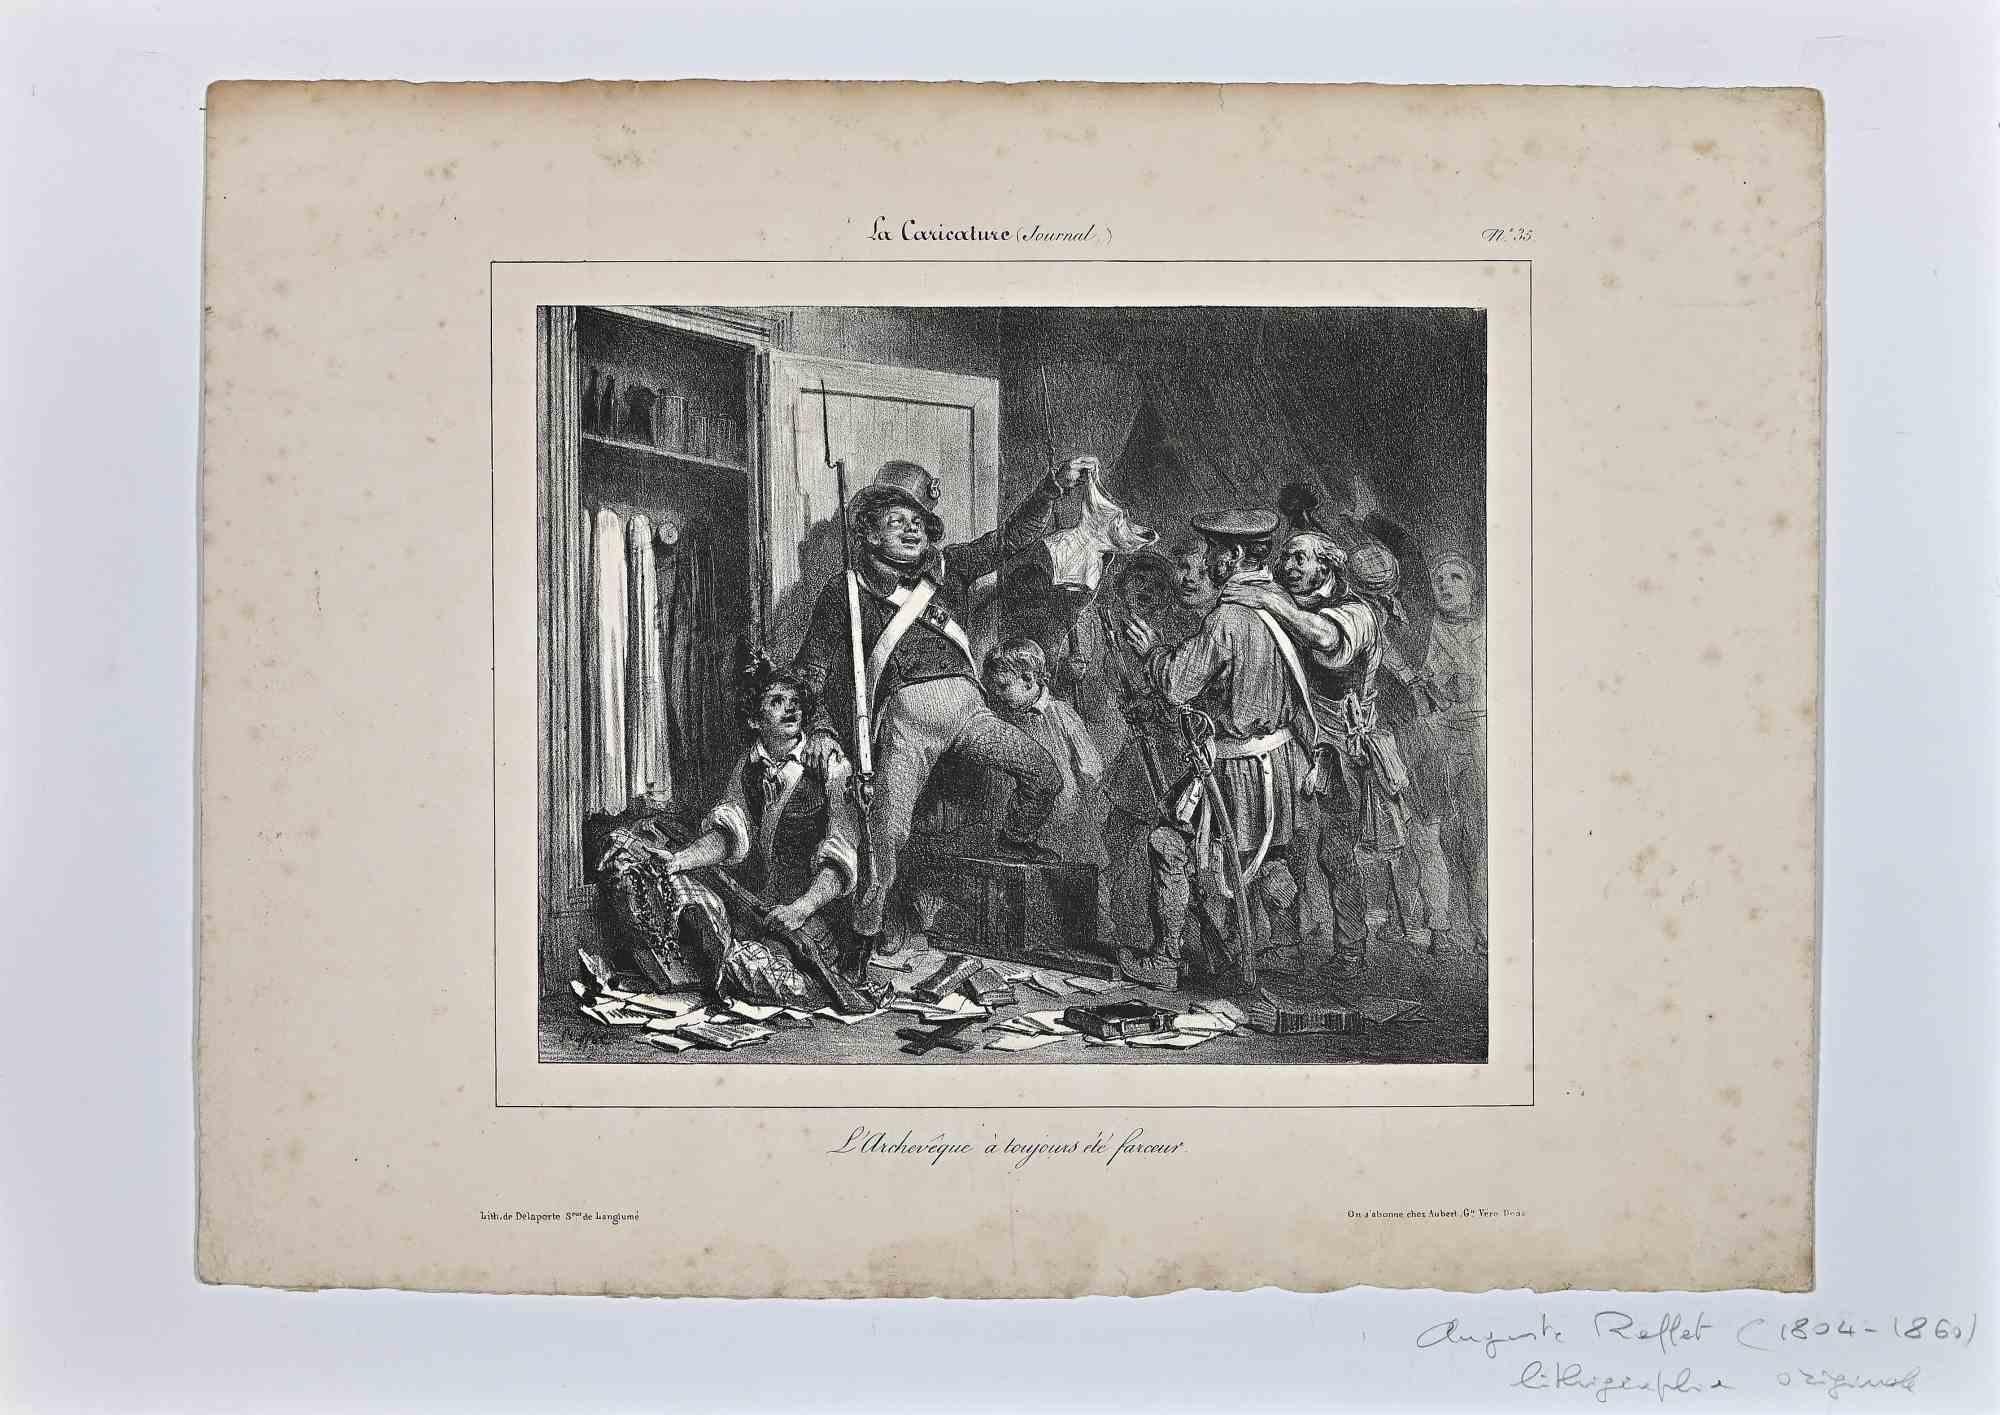 Real Life is a Lithograph realized by Auguste Raffet (1804-1860).

Good condition on a yellowed paper.

Hand signed by the artist on the lower left corner.

Denis Auguste Marie Raffet (2 March 1804 – 16 February 1860) was a French illustrator and